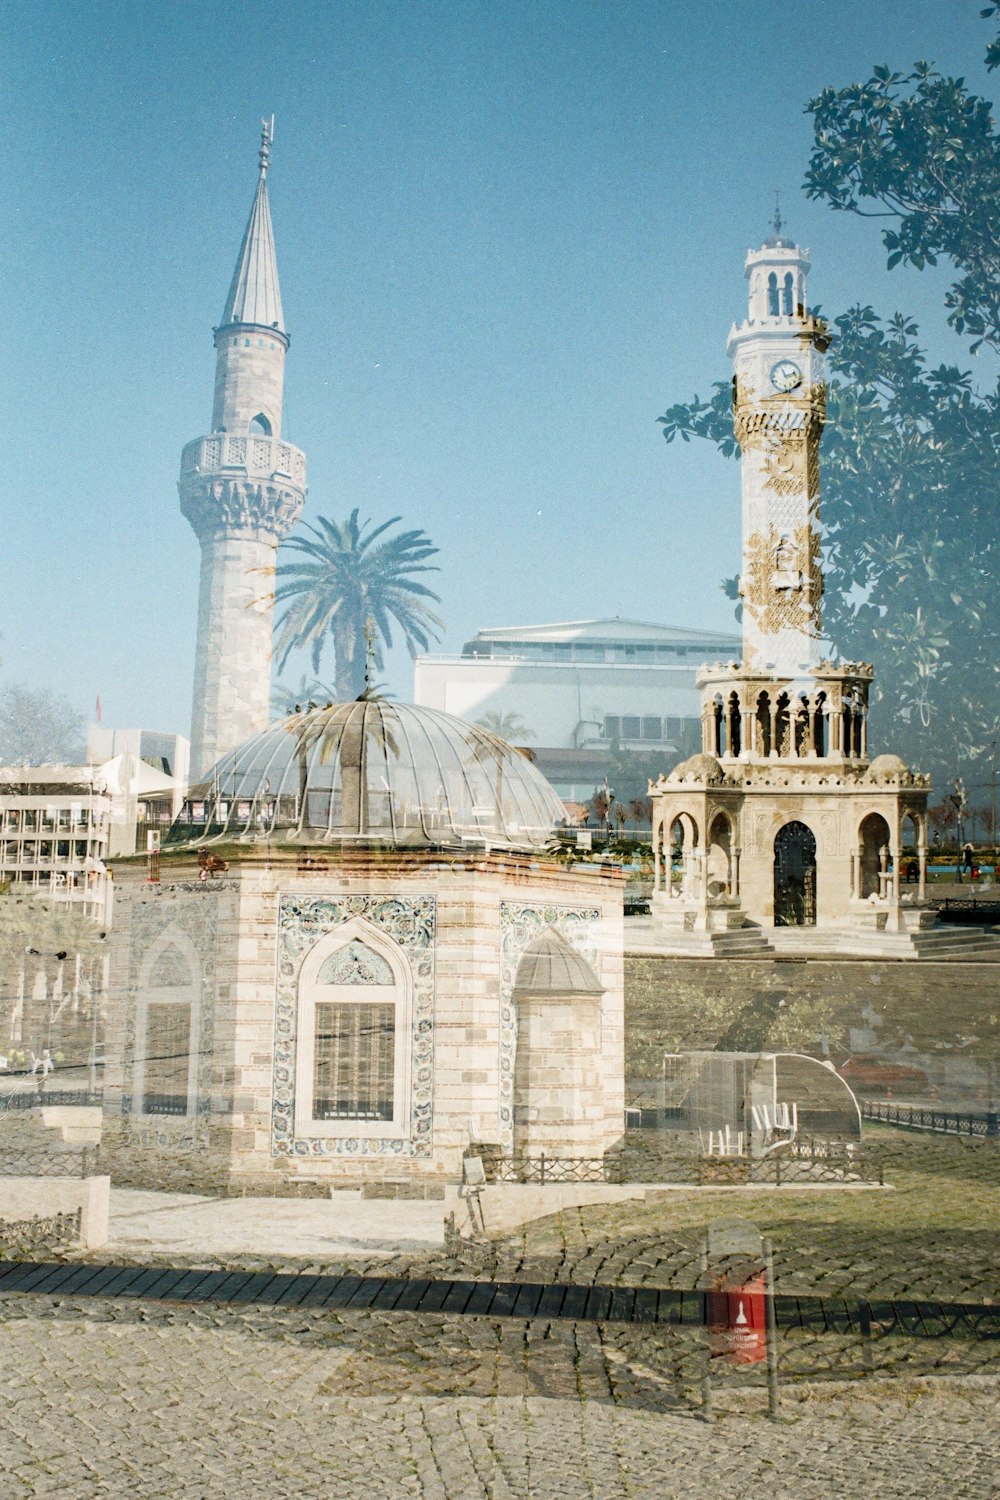 a large building with a clock tower in the background